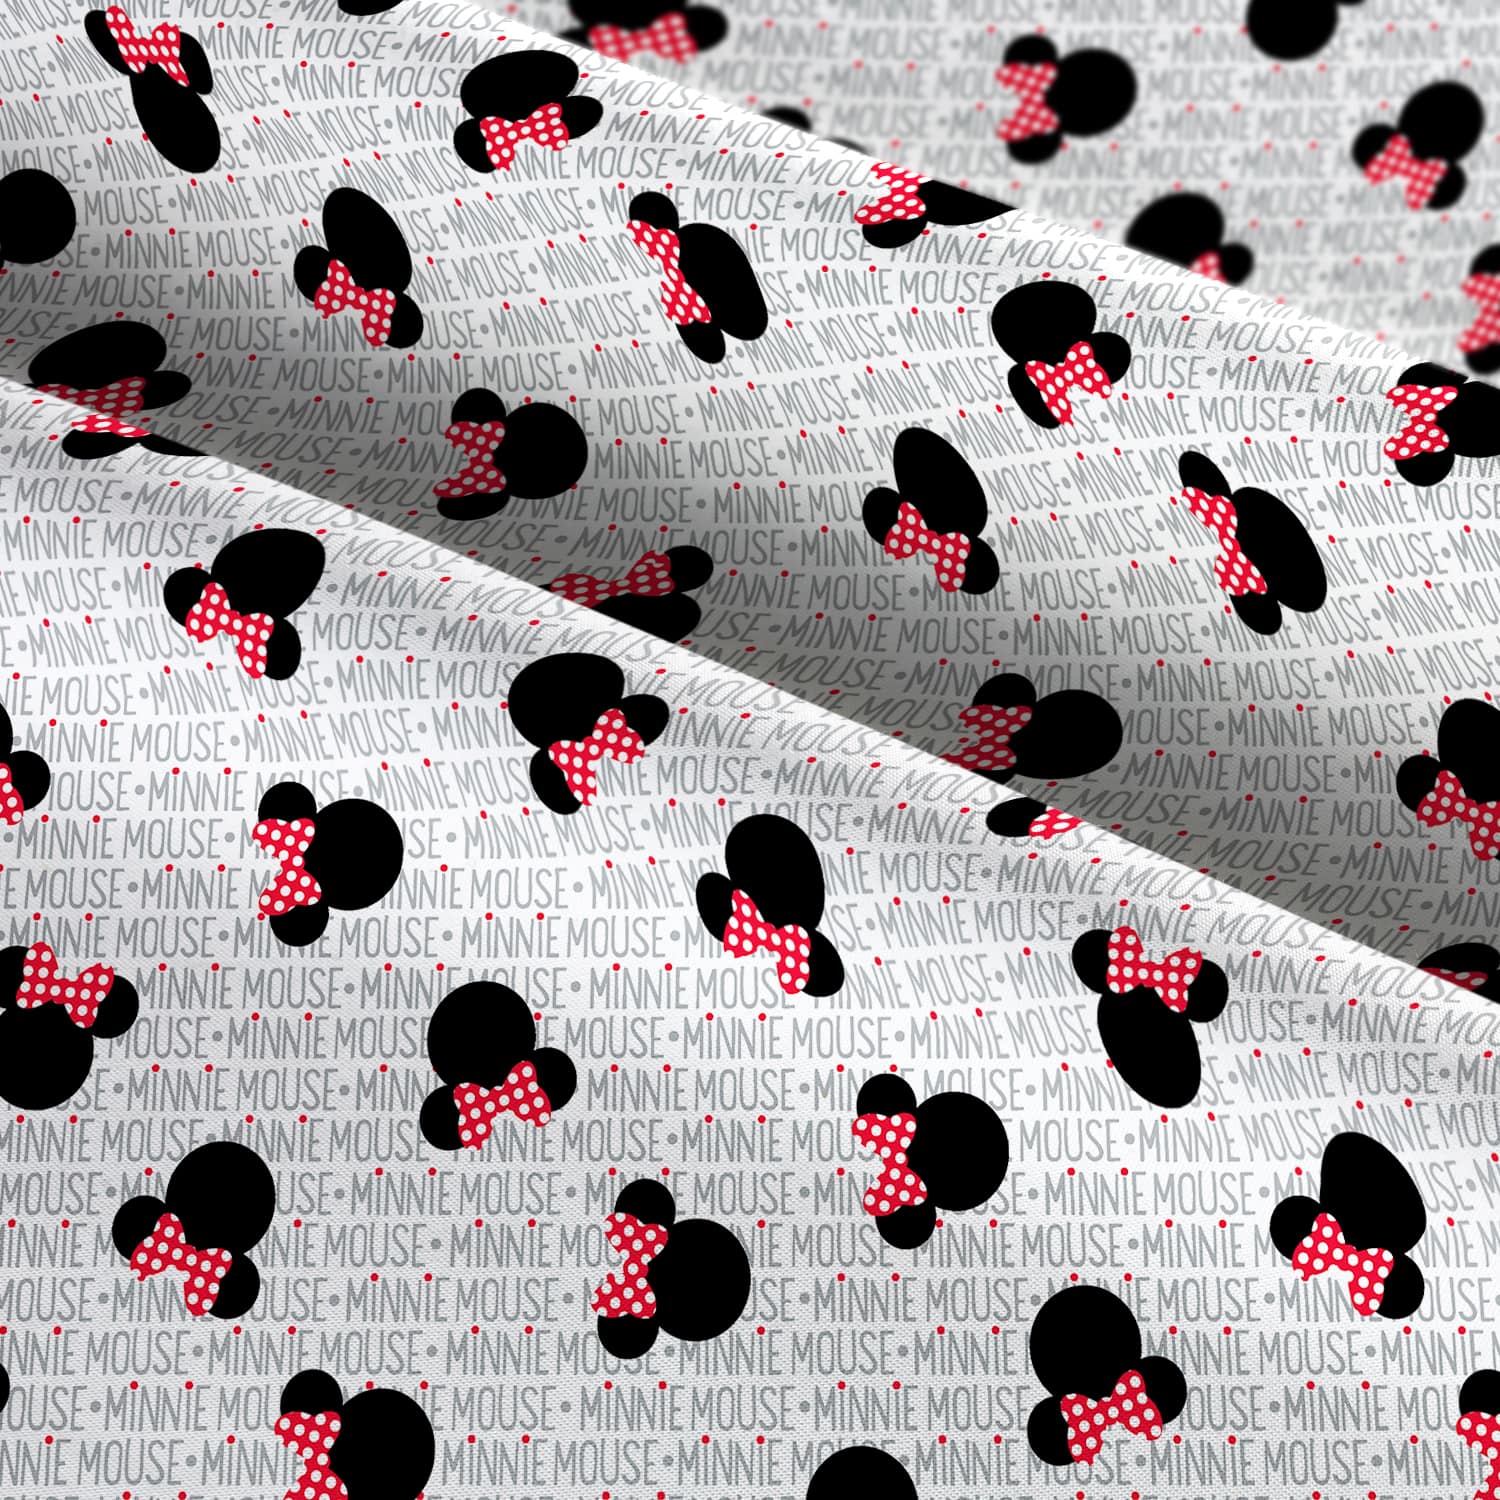 Pink Minnie Mouse Iron On Transfer For Light or Dark Fabric